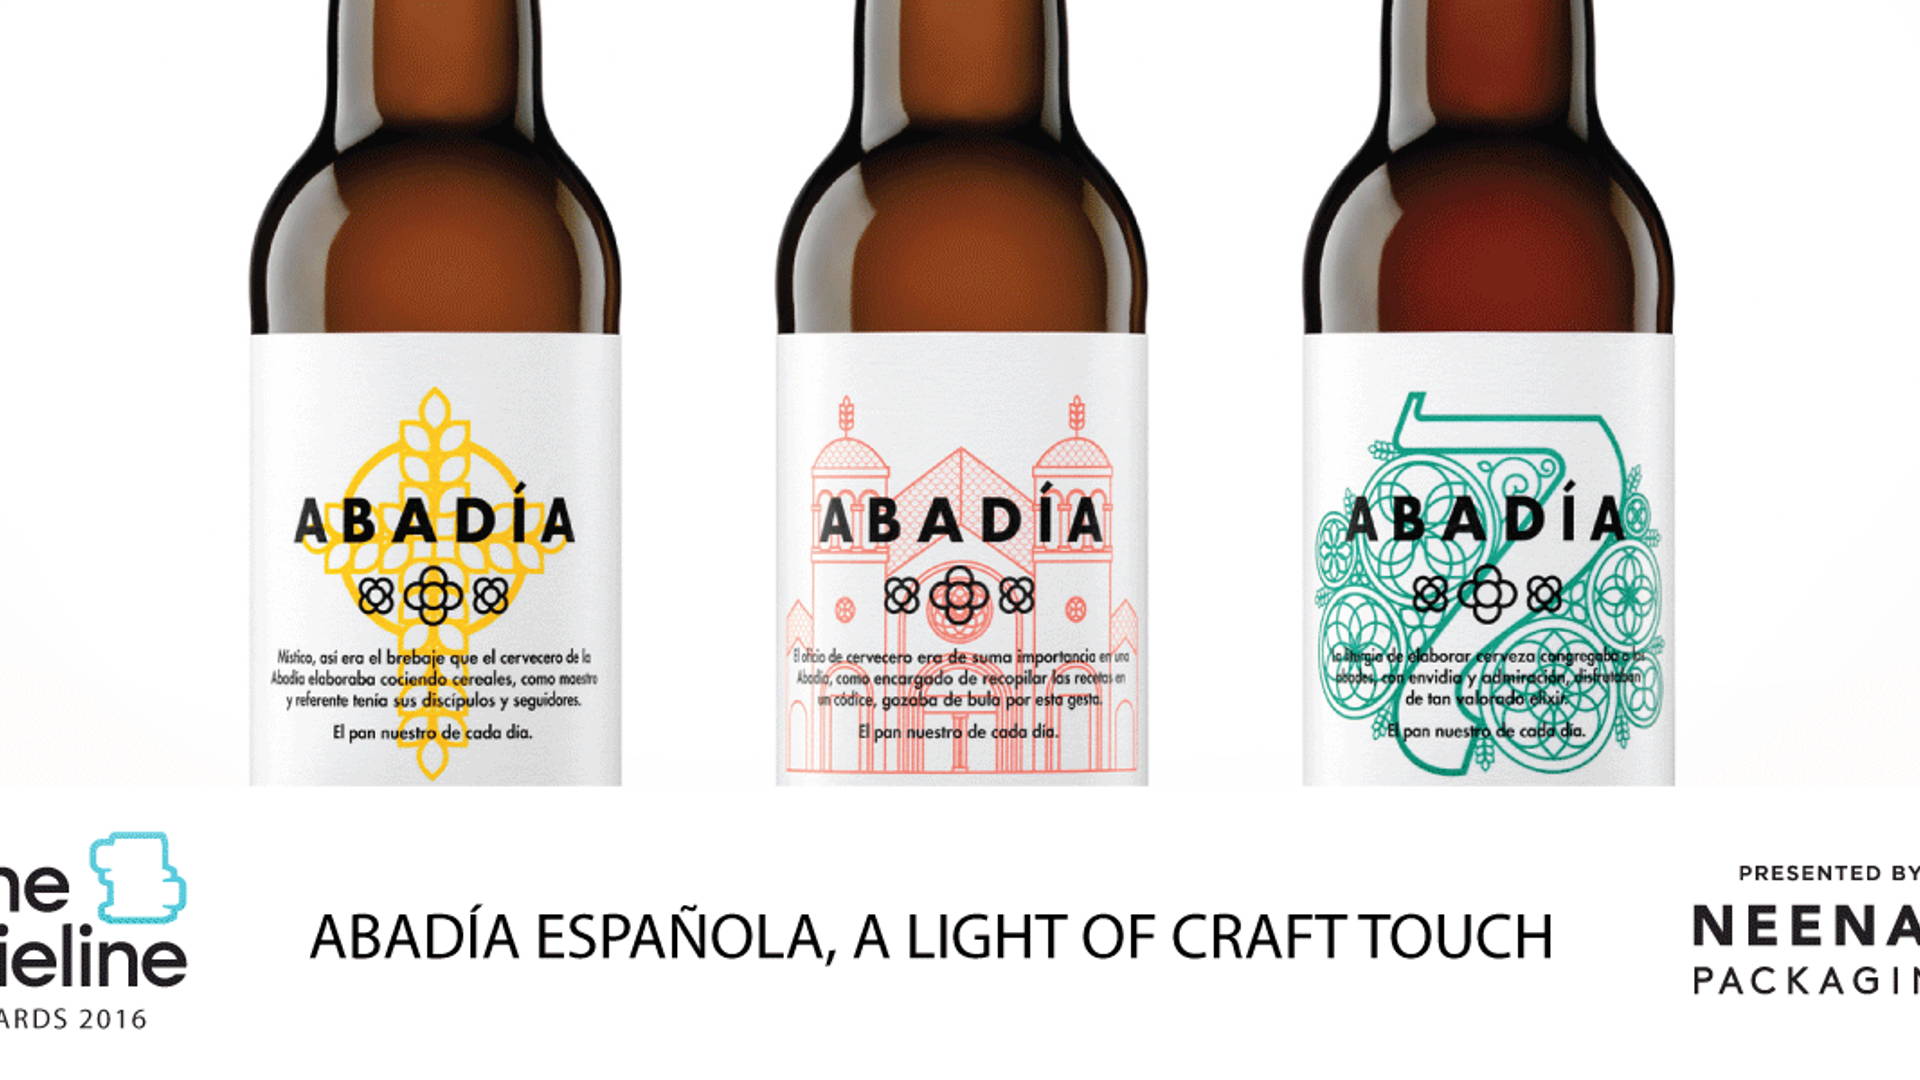 Featured image for The Dieline Awards 2016 Outstanding Achievements: Abadía Española, a light of craft touch